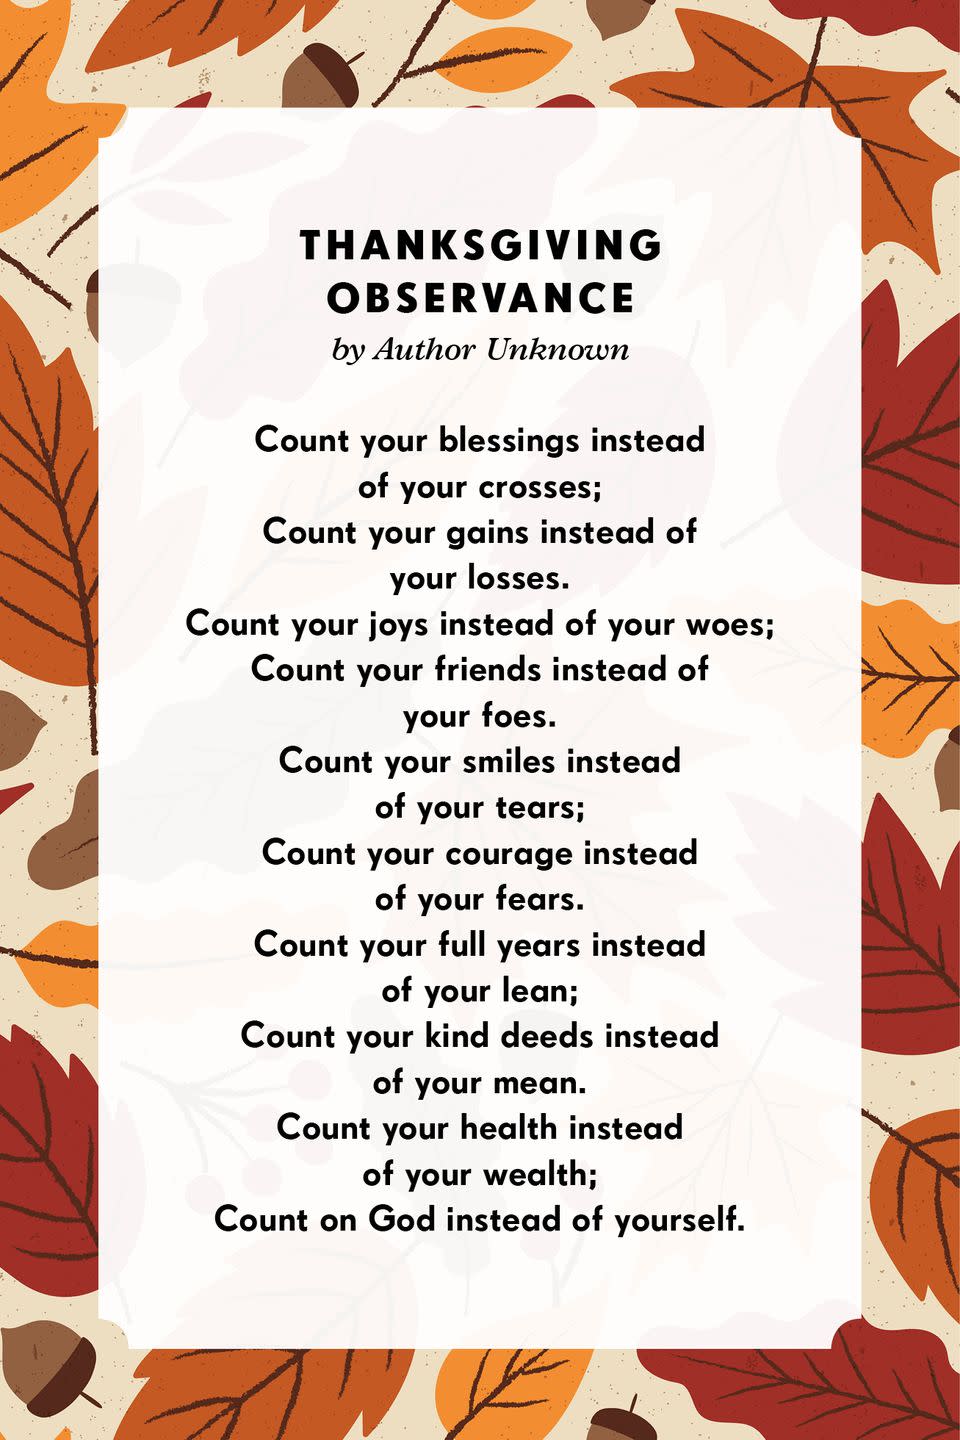 <p><strong>Thanksgiving Observance</strong></p><p>Count your blessings instead of your crosses;<br>Count your gains instead of your losses.<br>Count your joys instead of your woes;<br>Count your friends instead of your foes.<br>Count your smiles instead of your tears;<br>Count your courage instead of your fears.<br>Count your full years instead of your lean;<br>Count your kind deeds instead of your mean.<br>Count your health instead of your wealth;<br>Count on God instead of yourself.</p>